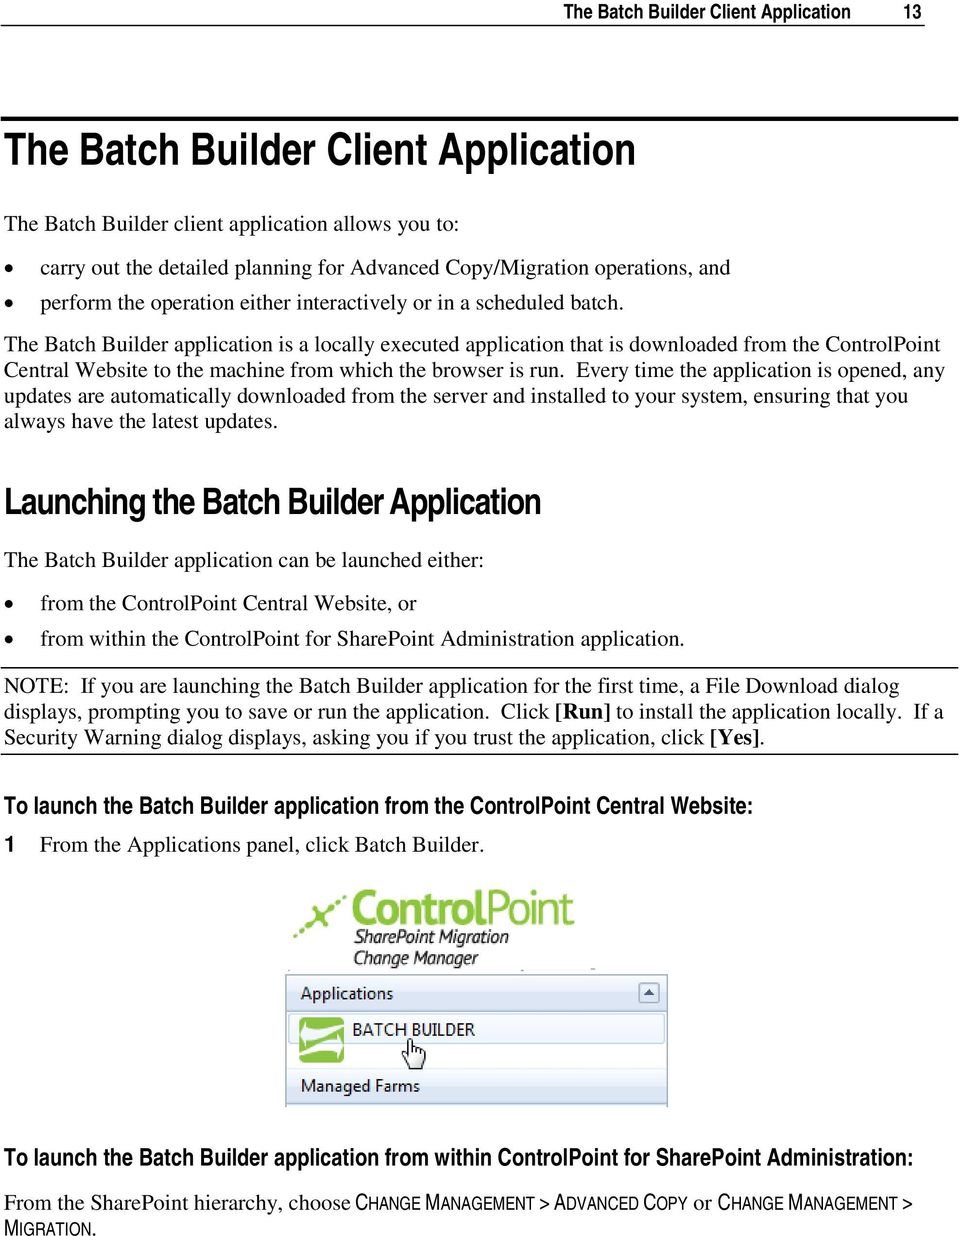 The Batch Builder application is a locally executed application that is downloaded from the ControlPoint Central Website to the machine from which the browser is run.